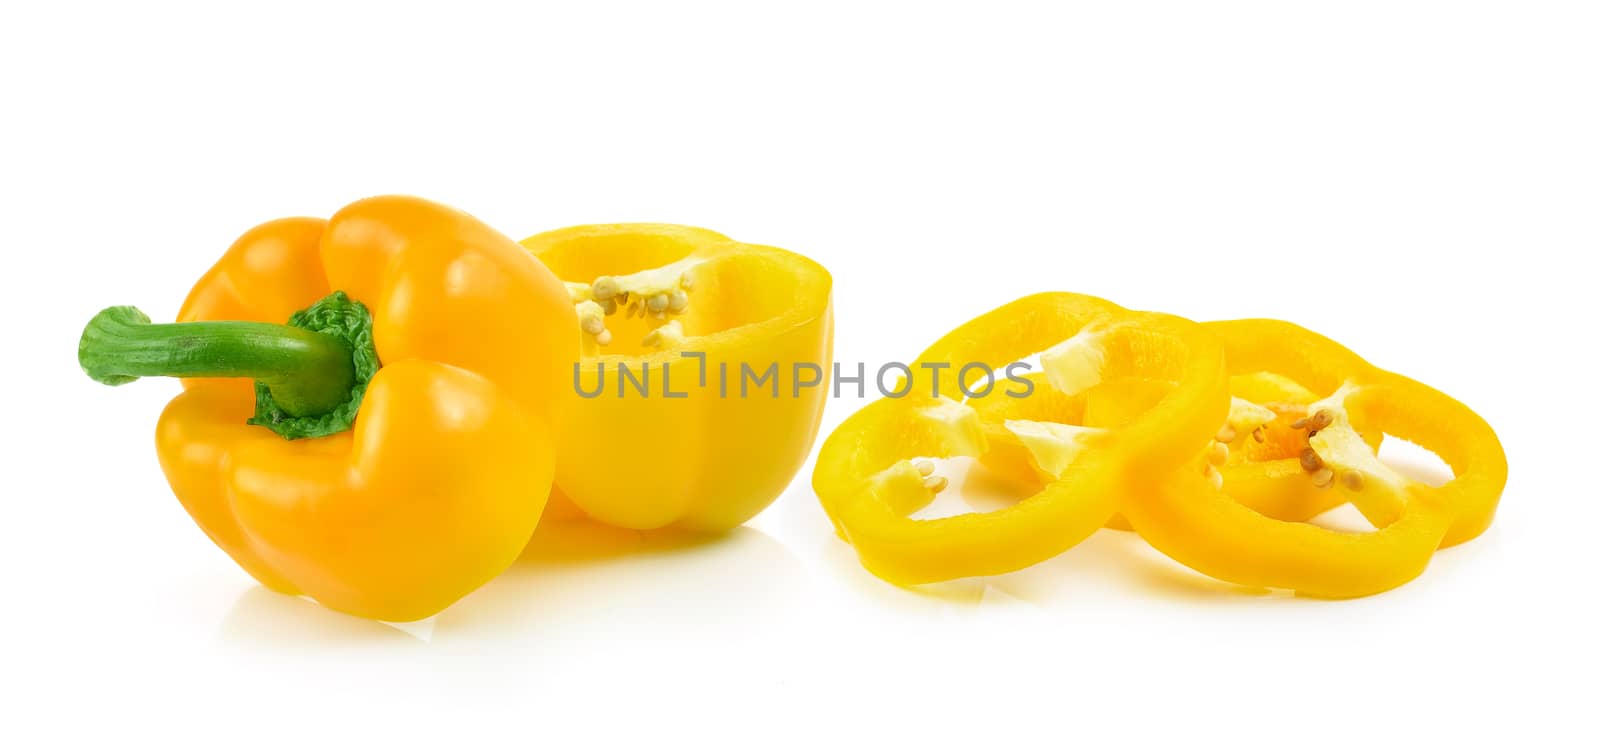 Sliced yellow paprika pepper isolated on white background